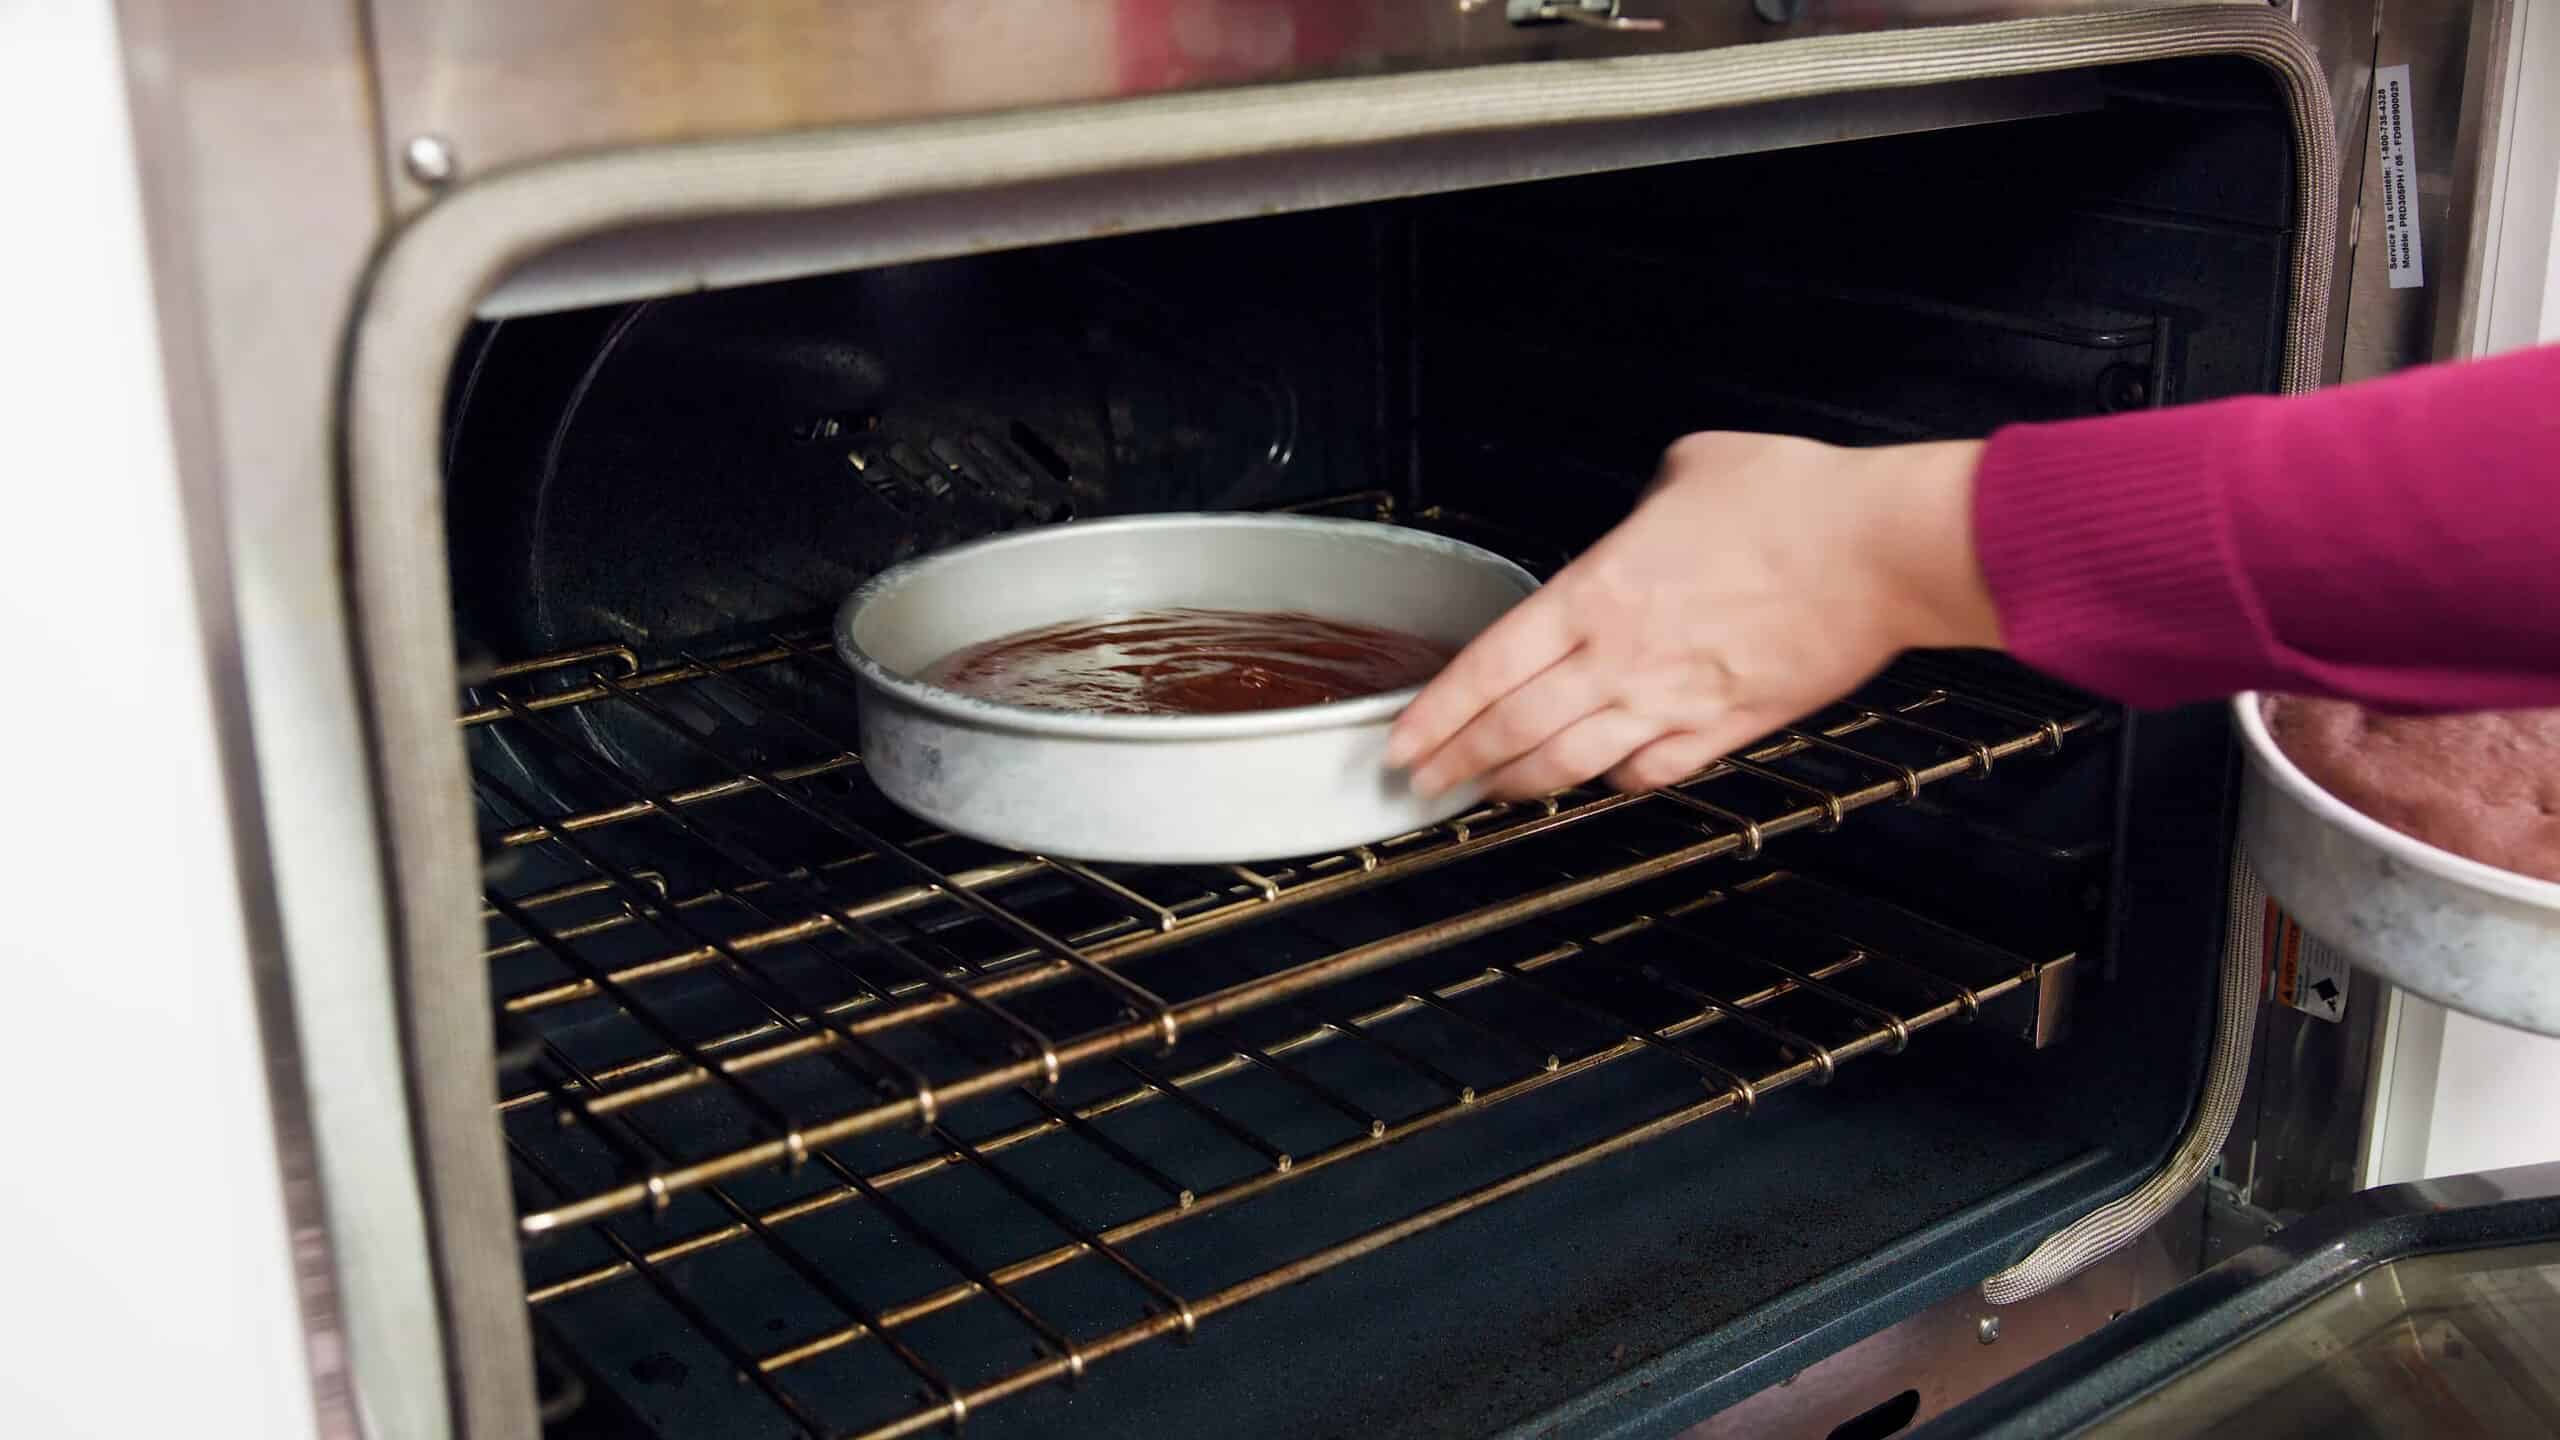 Angled view of an open oven with a metal round cake pan filled with chocolate cake batter placed on a metal rack in the middle of the oven.